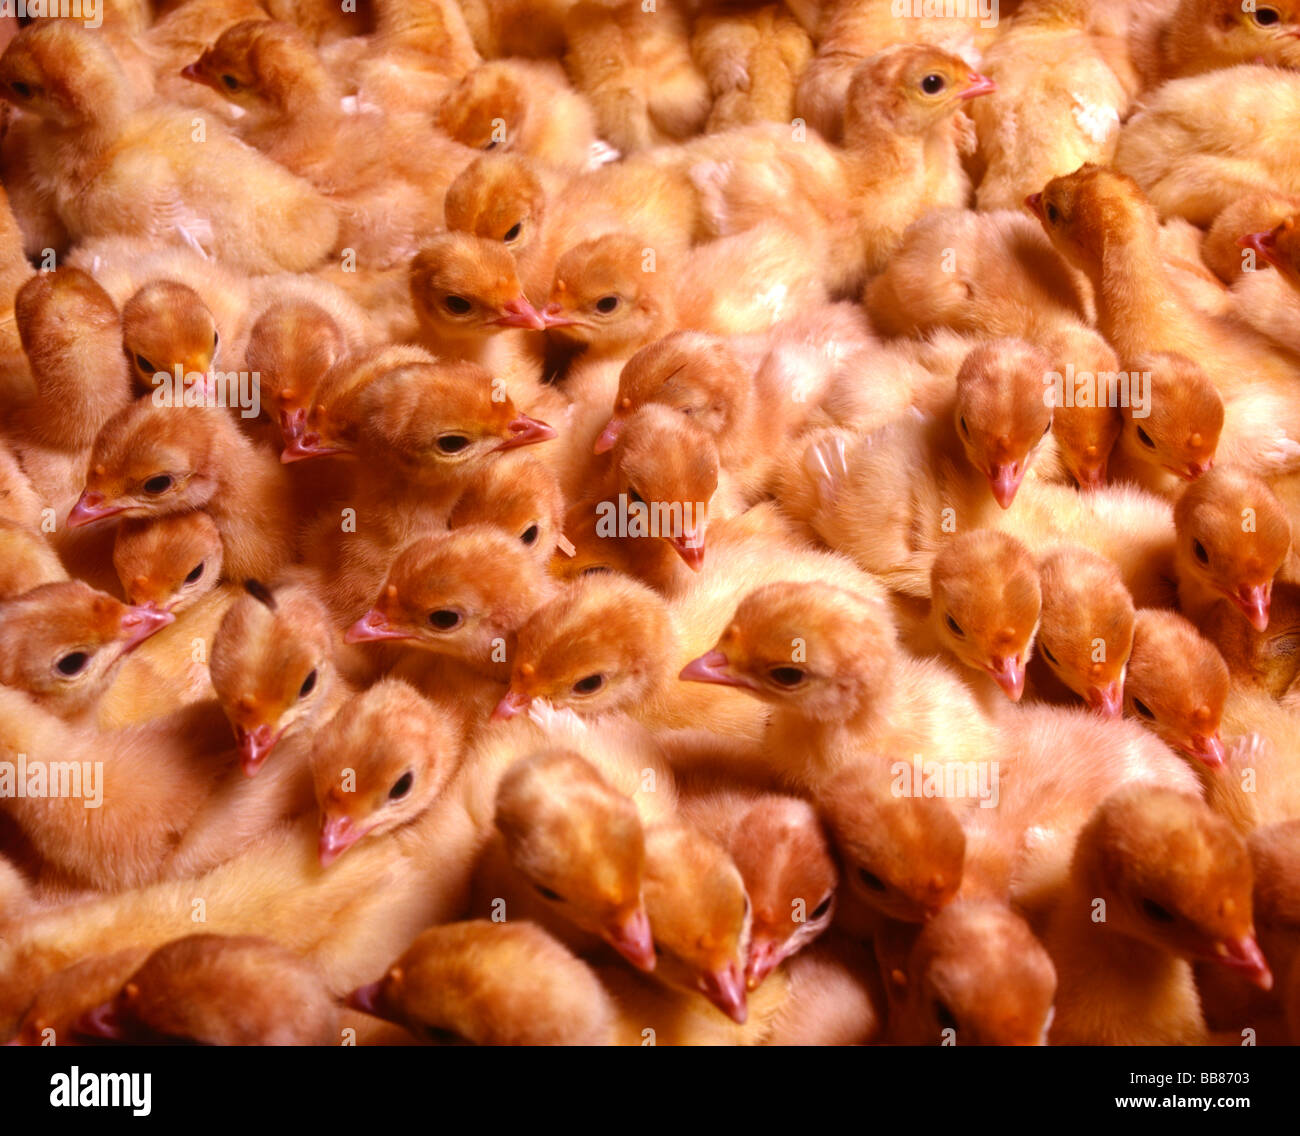 A lot of little turkeies in detail Stock Photo